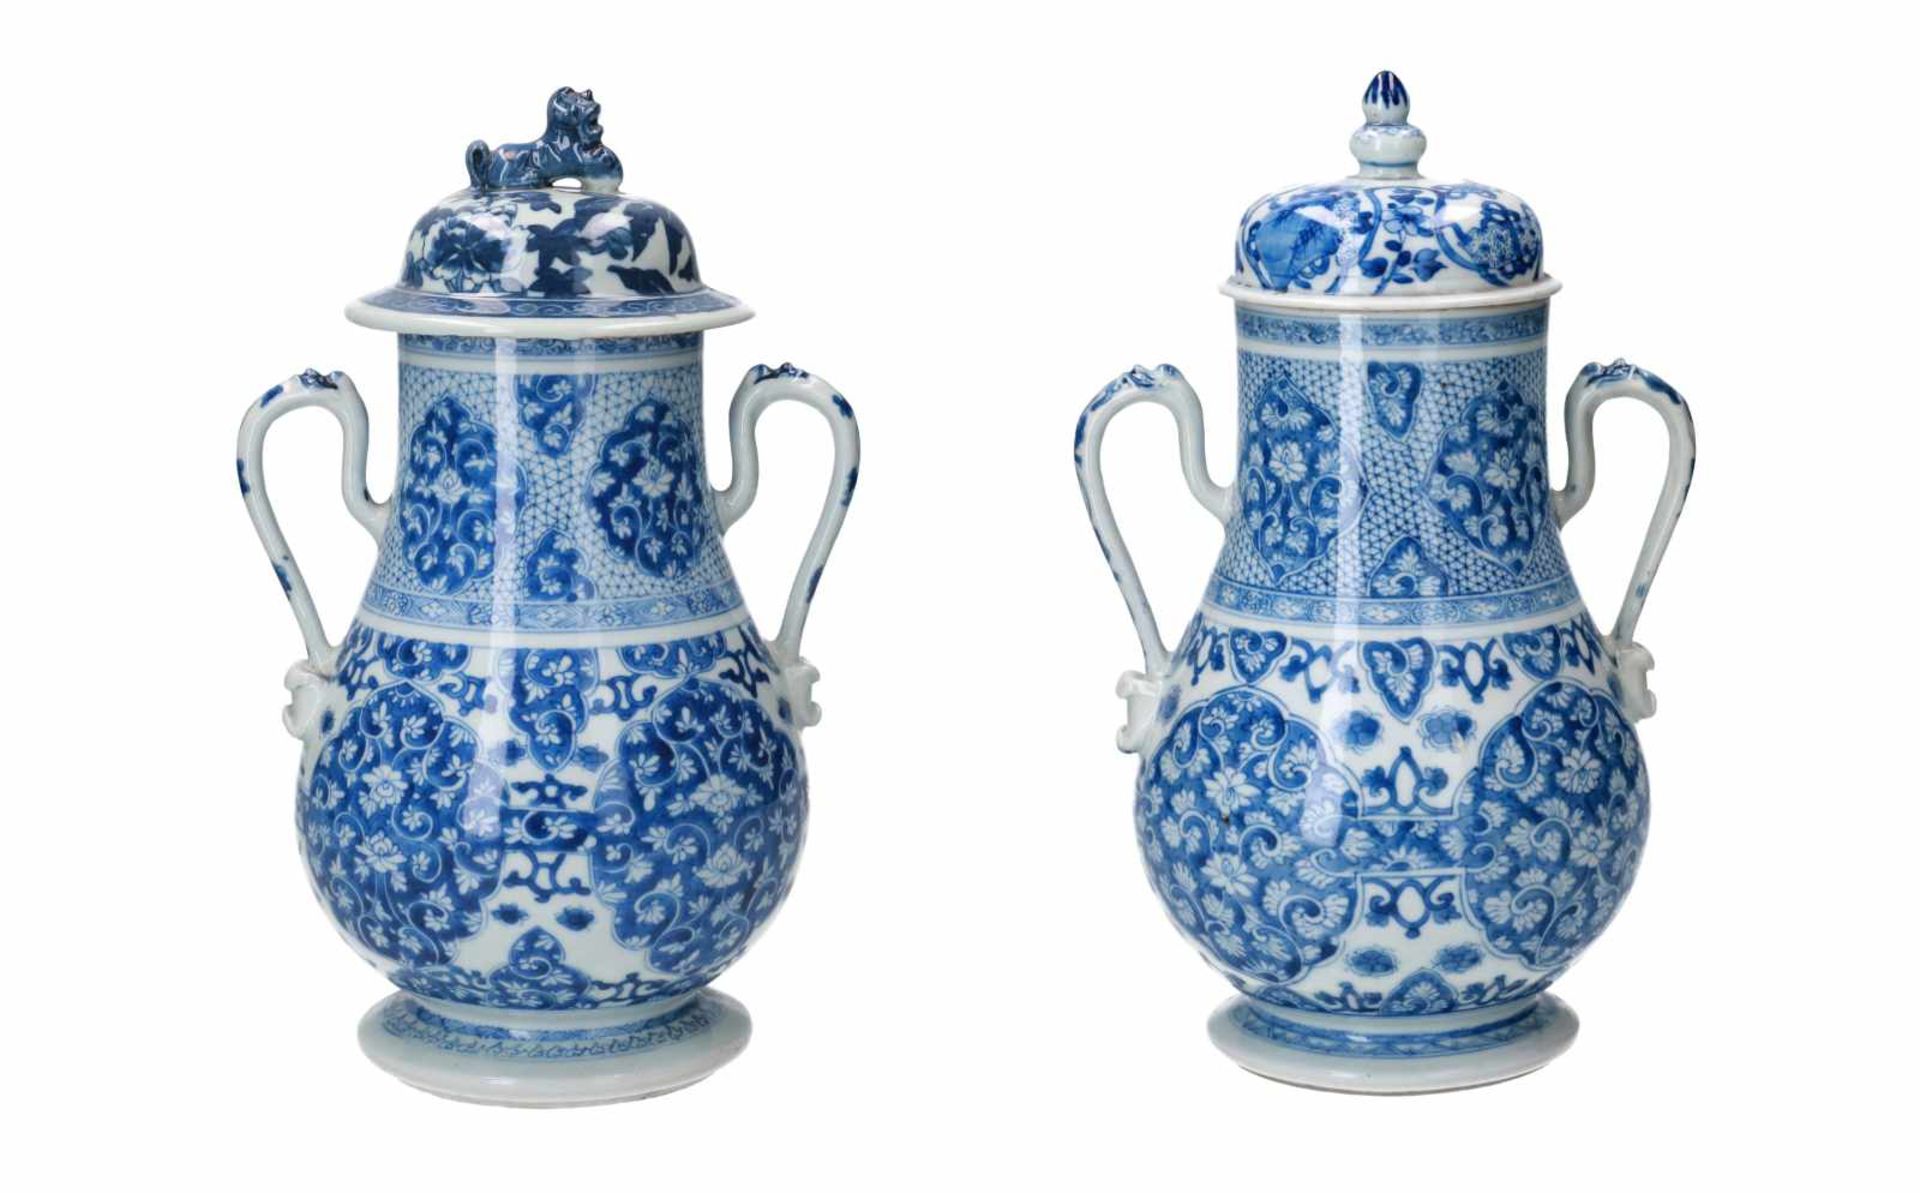 A pair of blue and white porcelain vases with two handles. Unmarked. Covers associated. China,